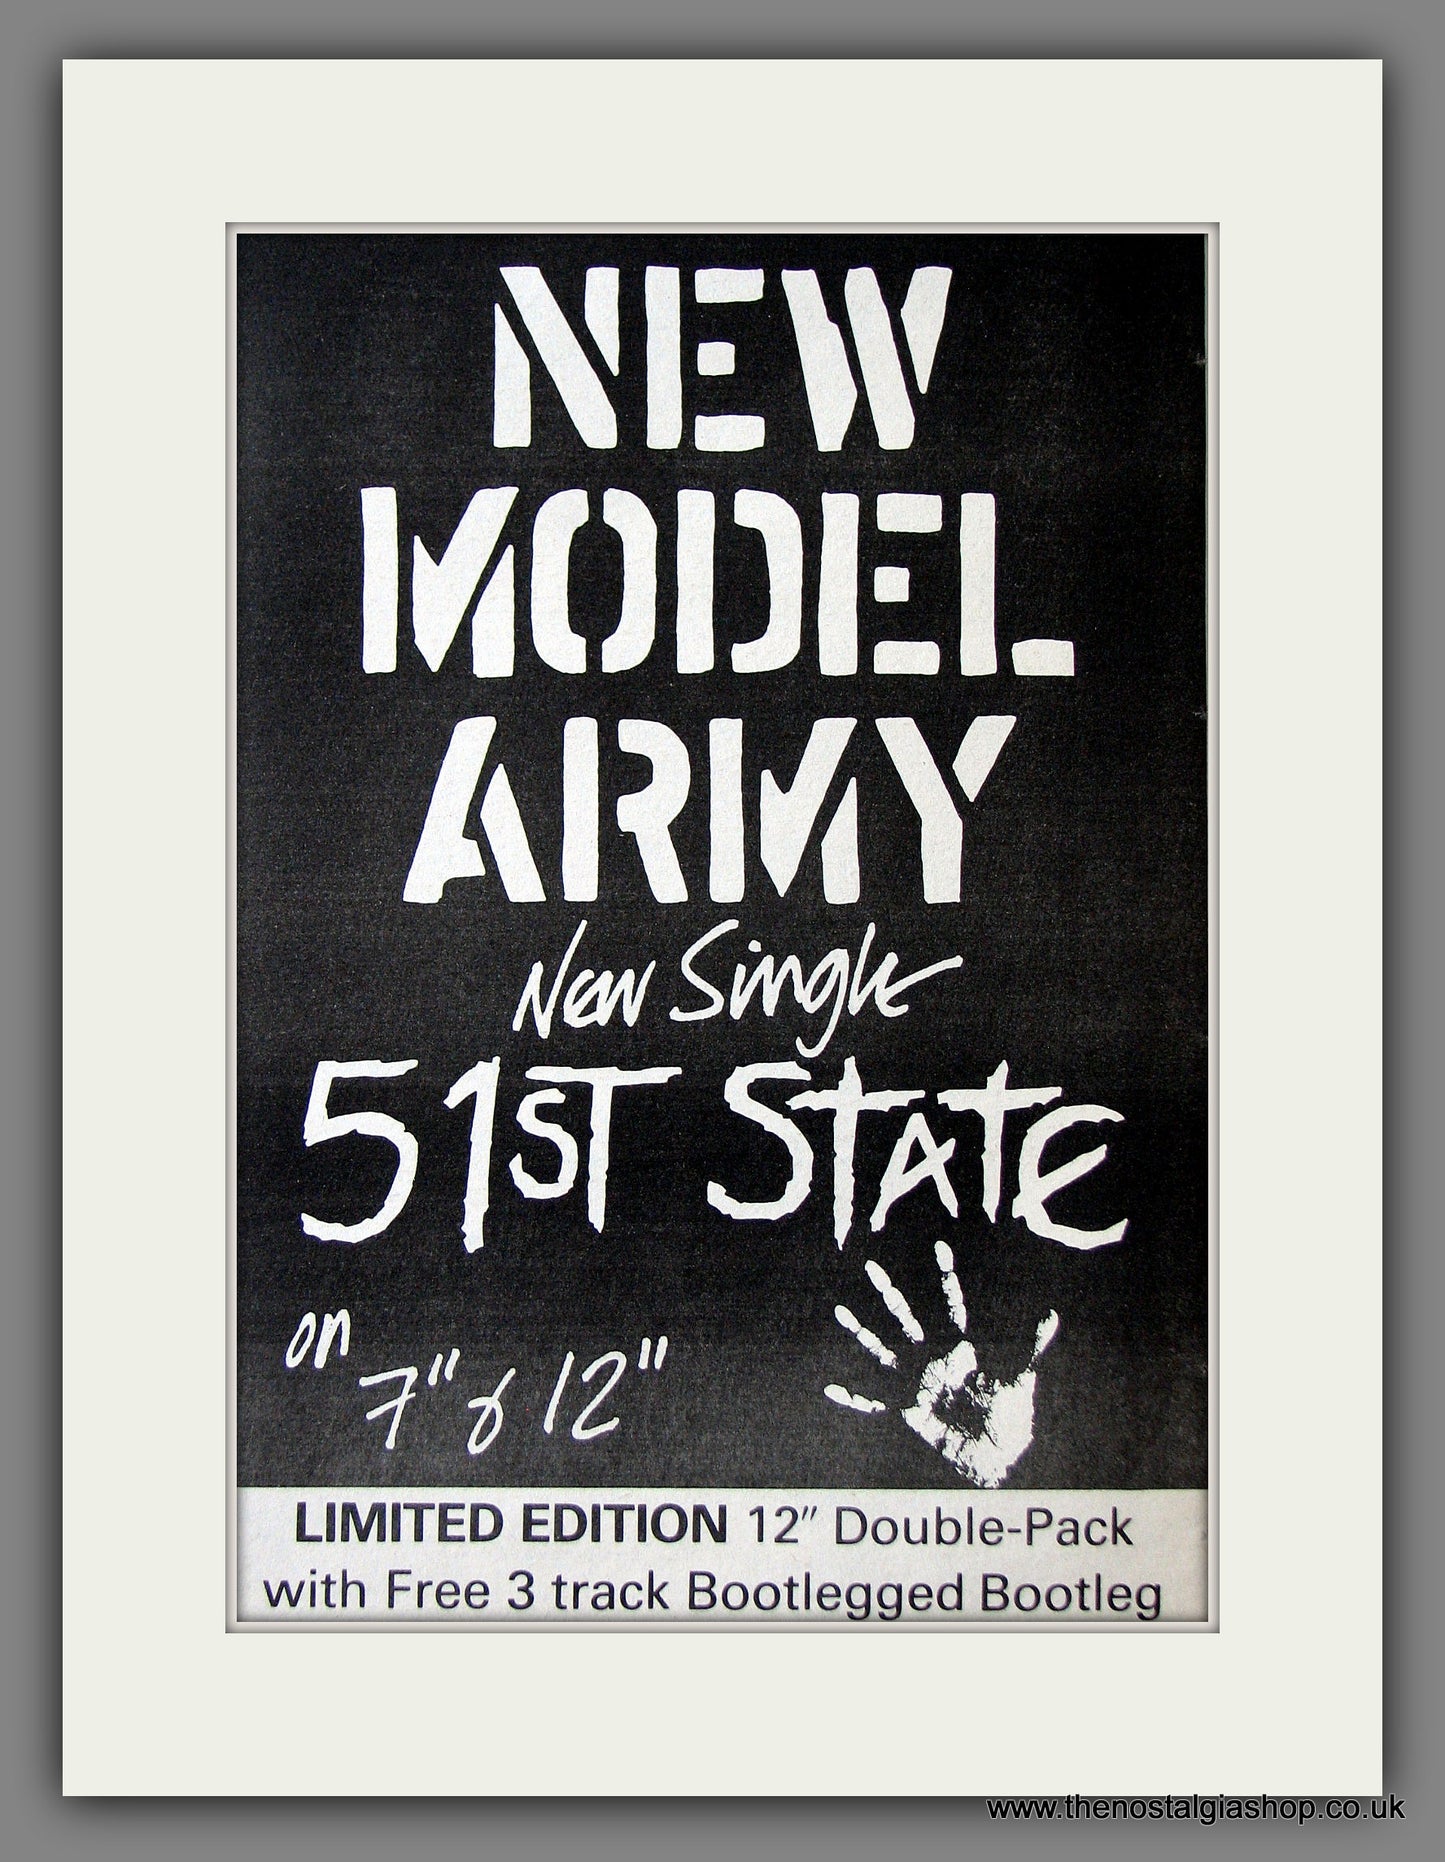 New Model Army. 51St State. Original Music Advert 1986 (ref AD55502)